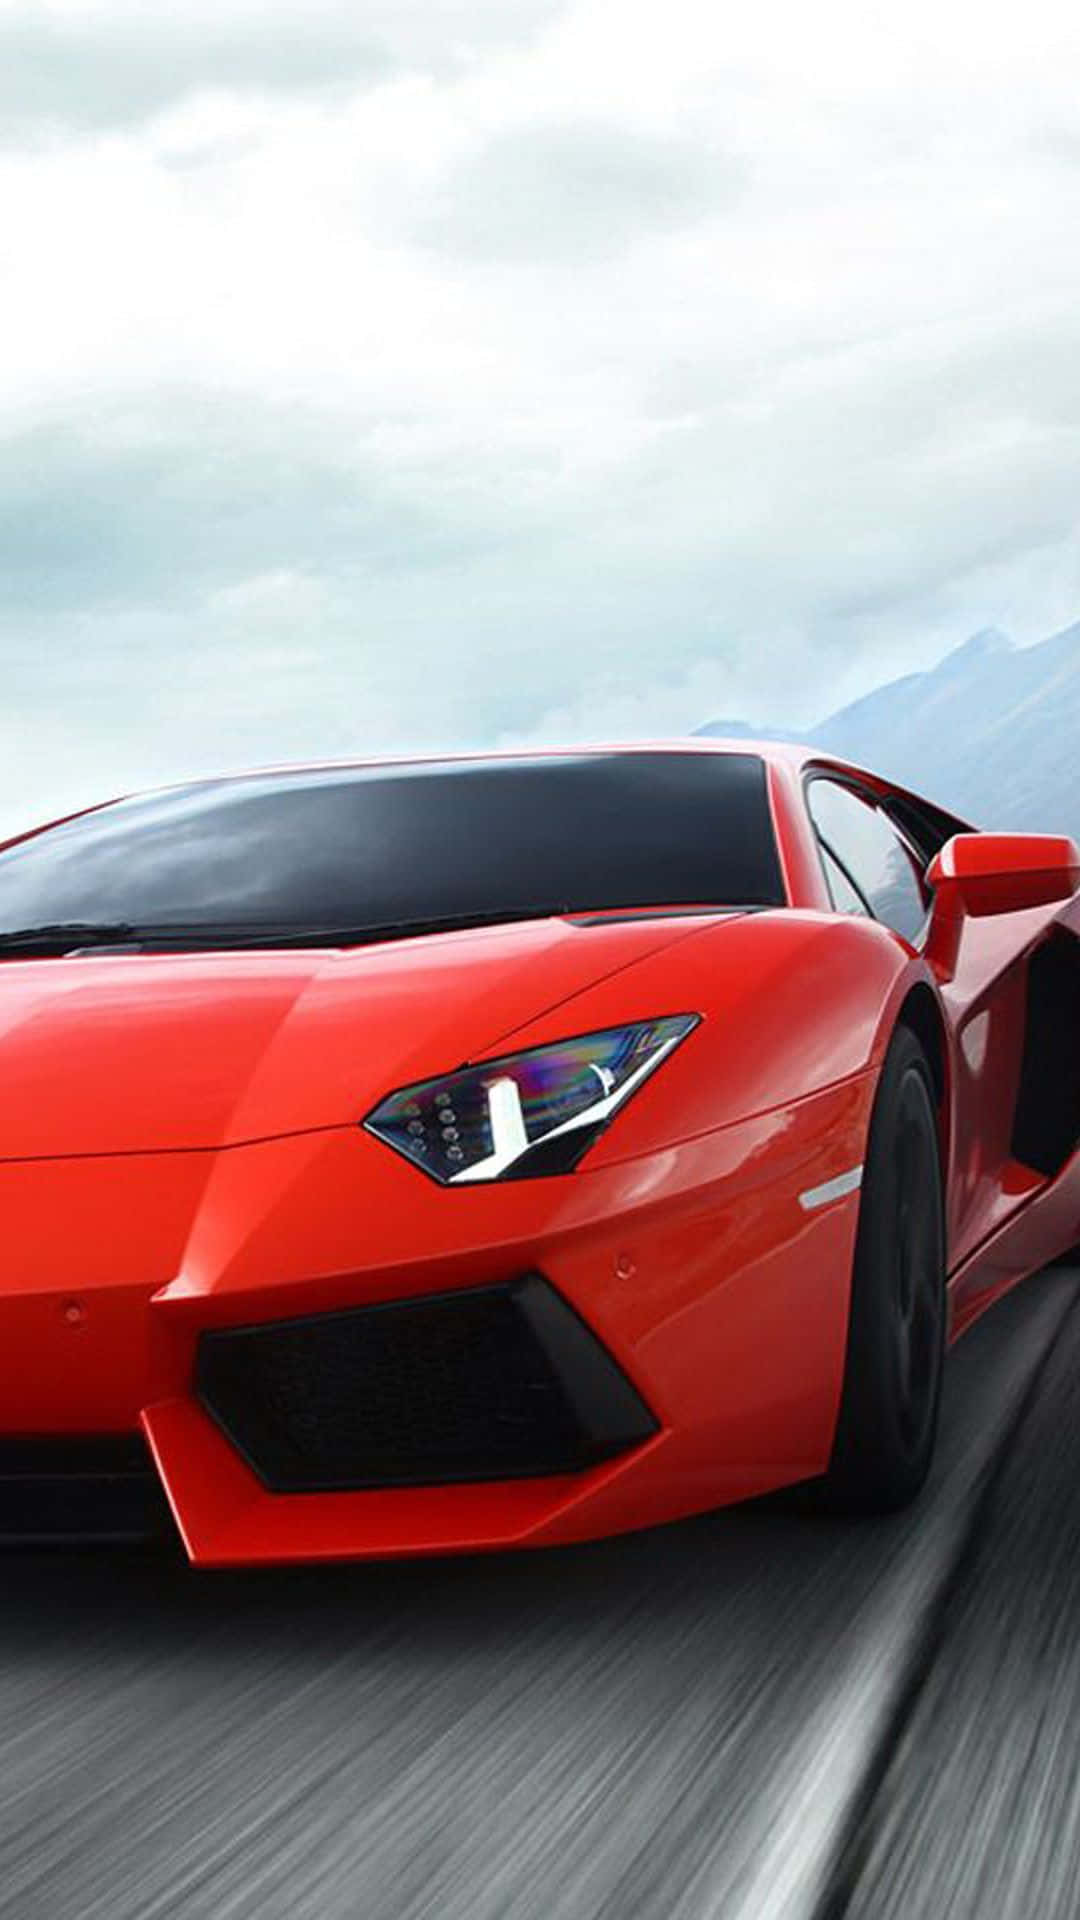 The World's Most Luxurious and Powerful Lamborghini Phone Wallpaper